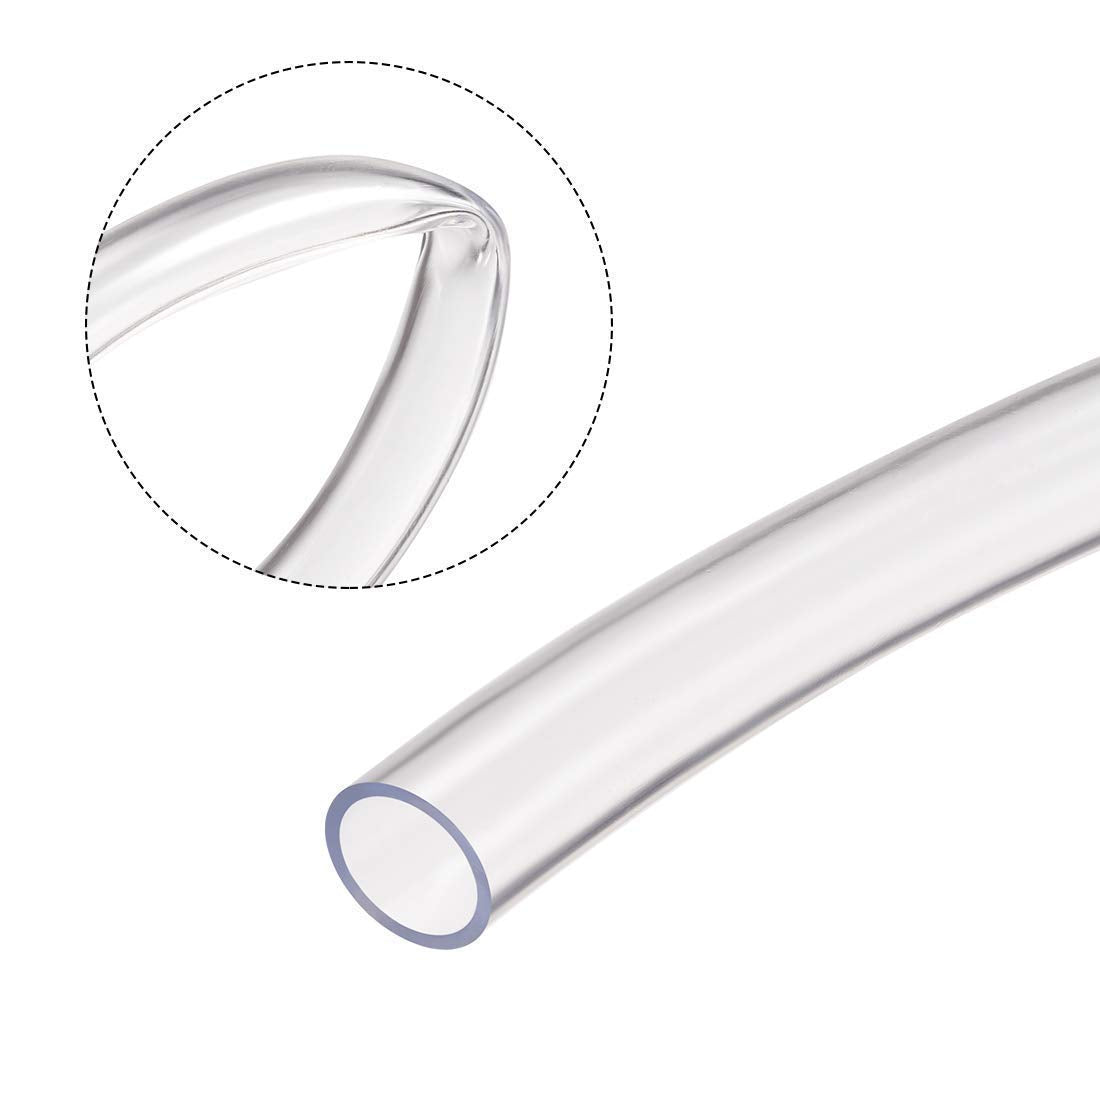 6mm Air Water Transparent Tube Pipe (ID: 6 mm)